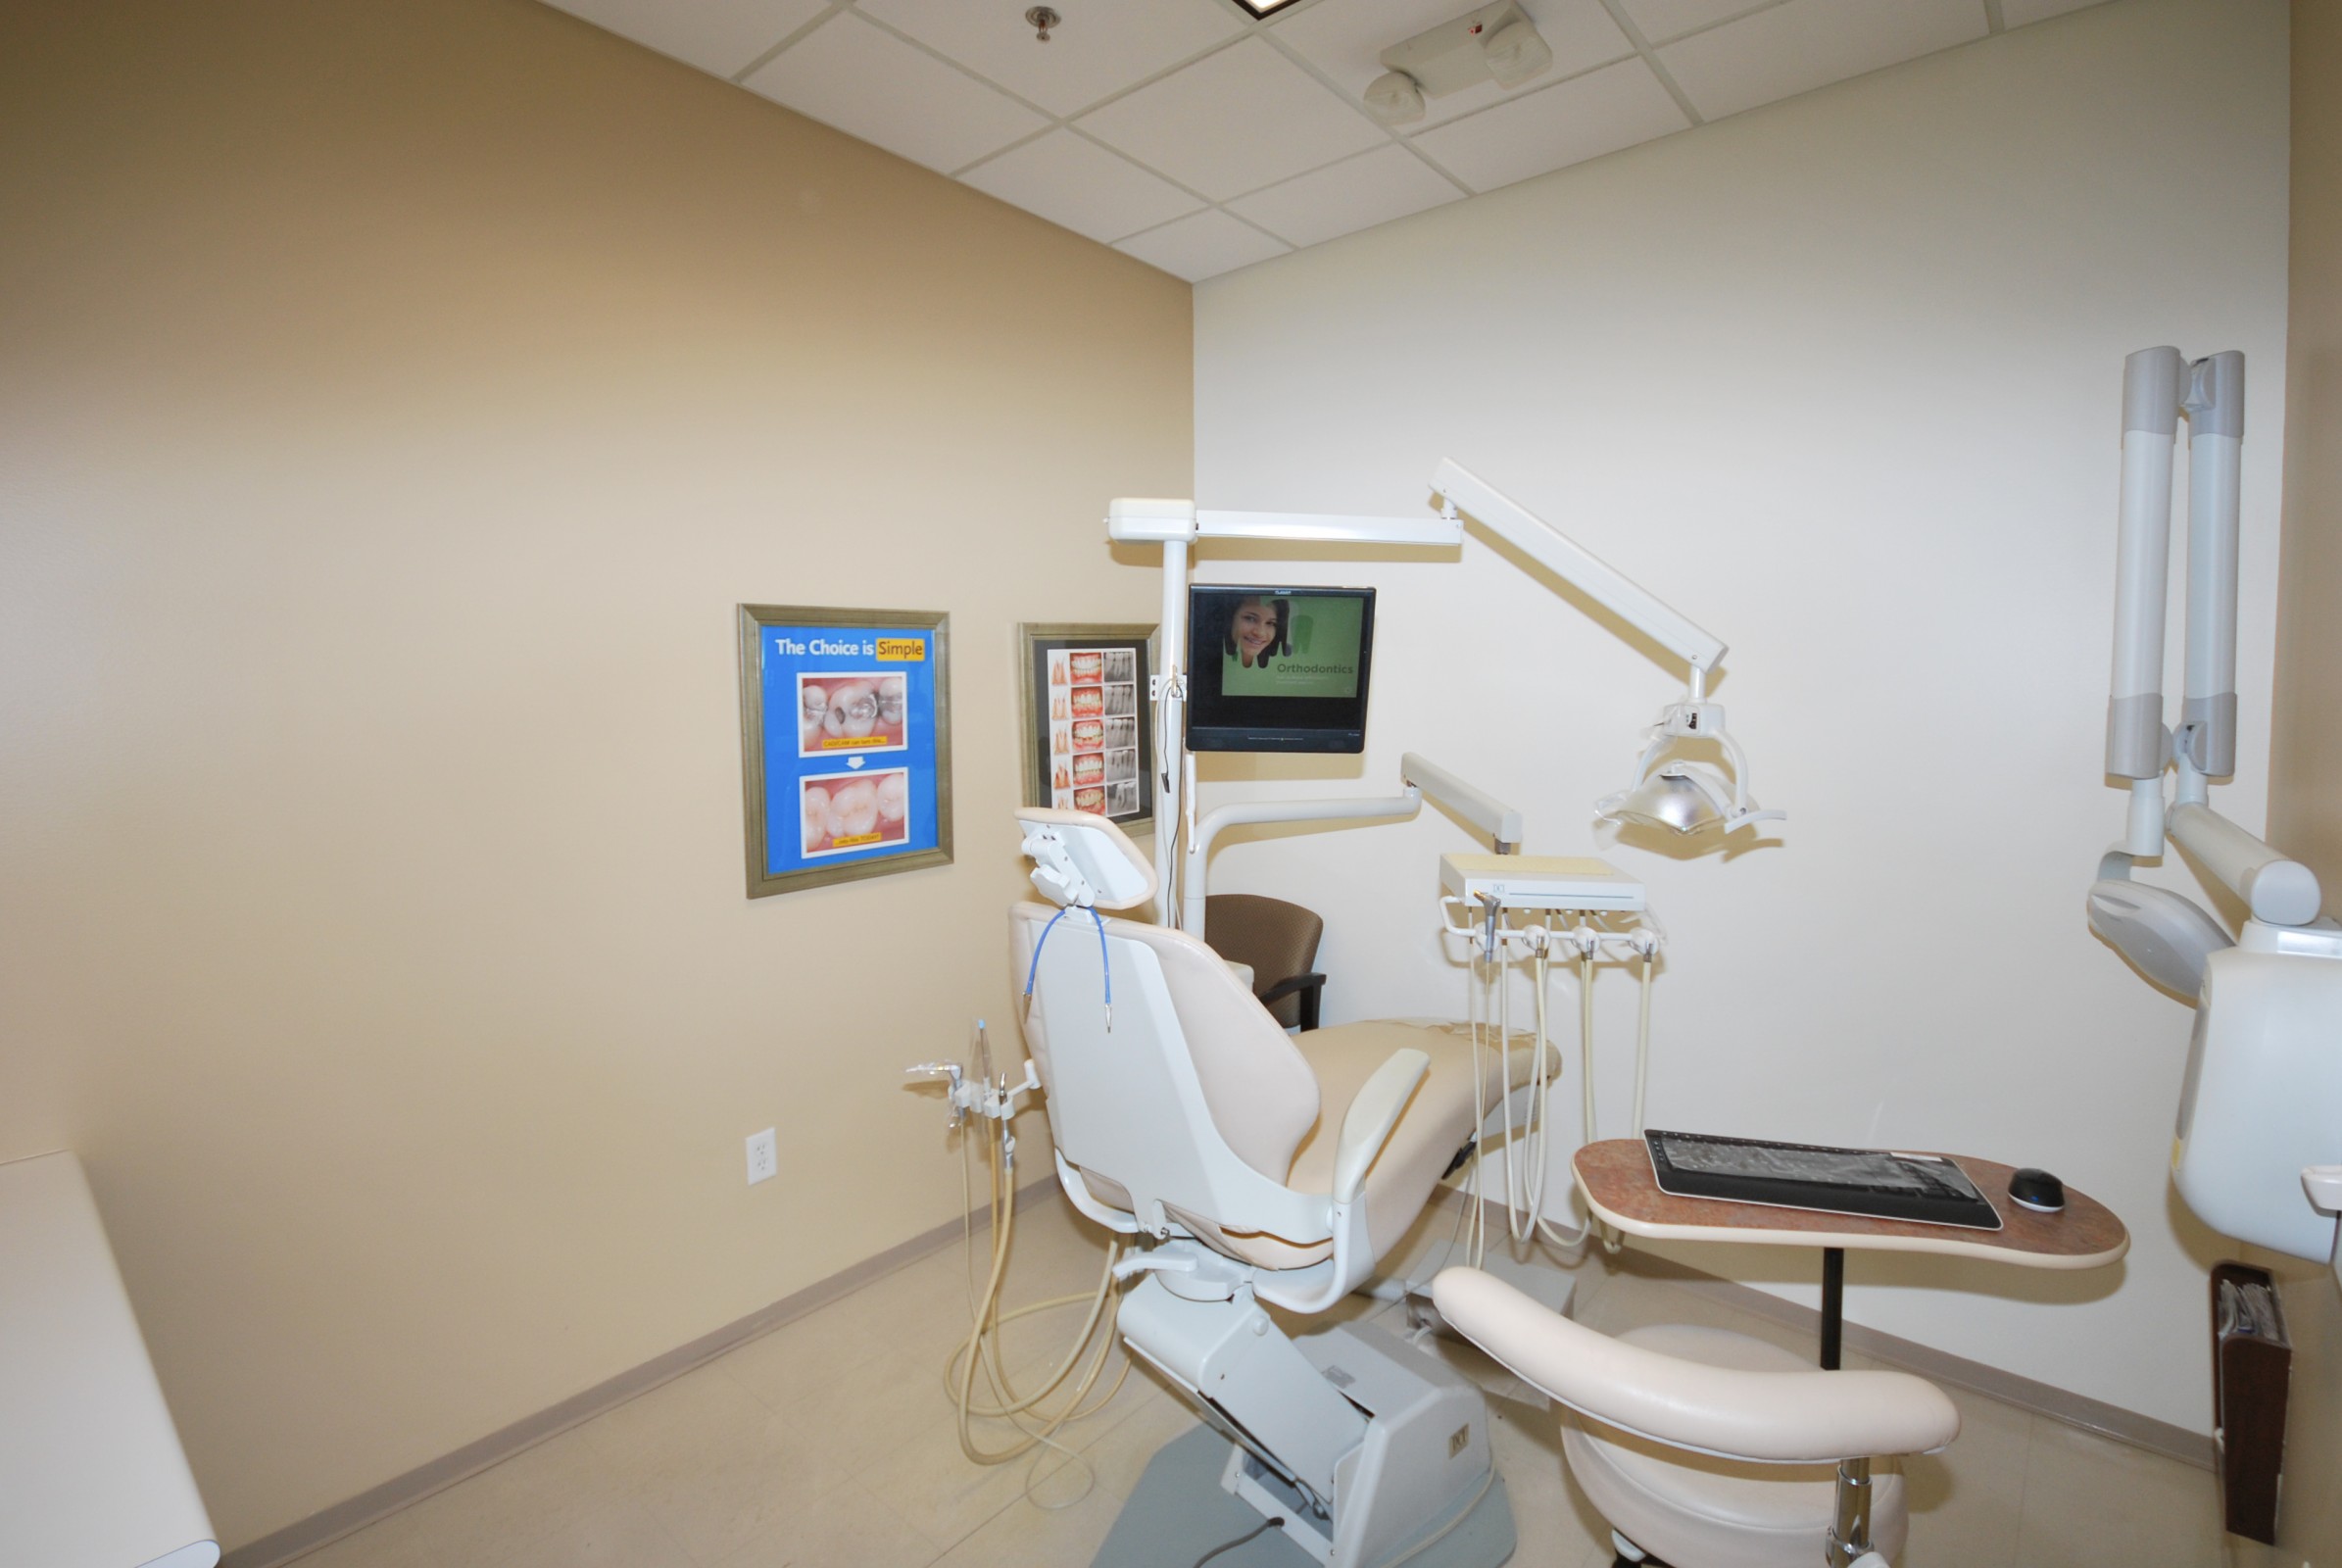 West Plano Modern Dentistry and Orthodontics